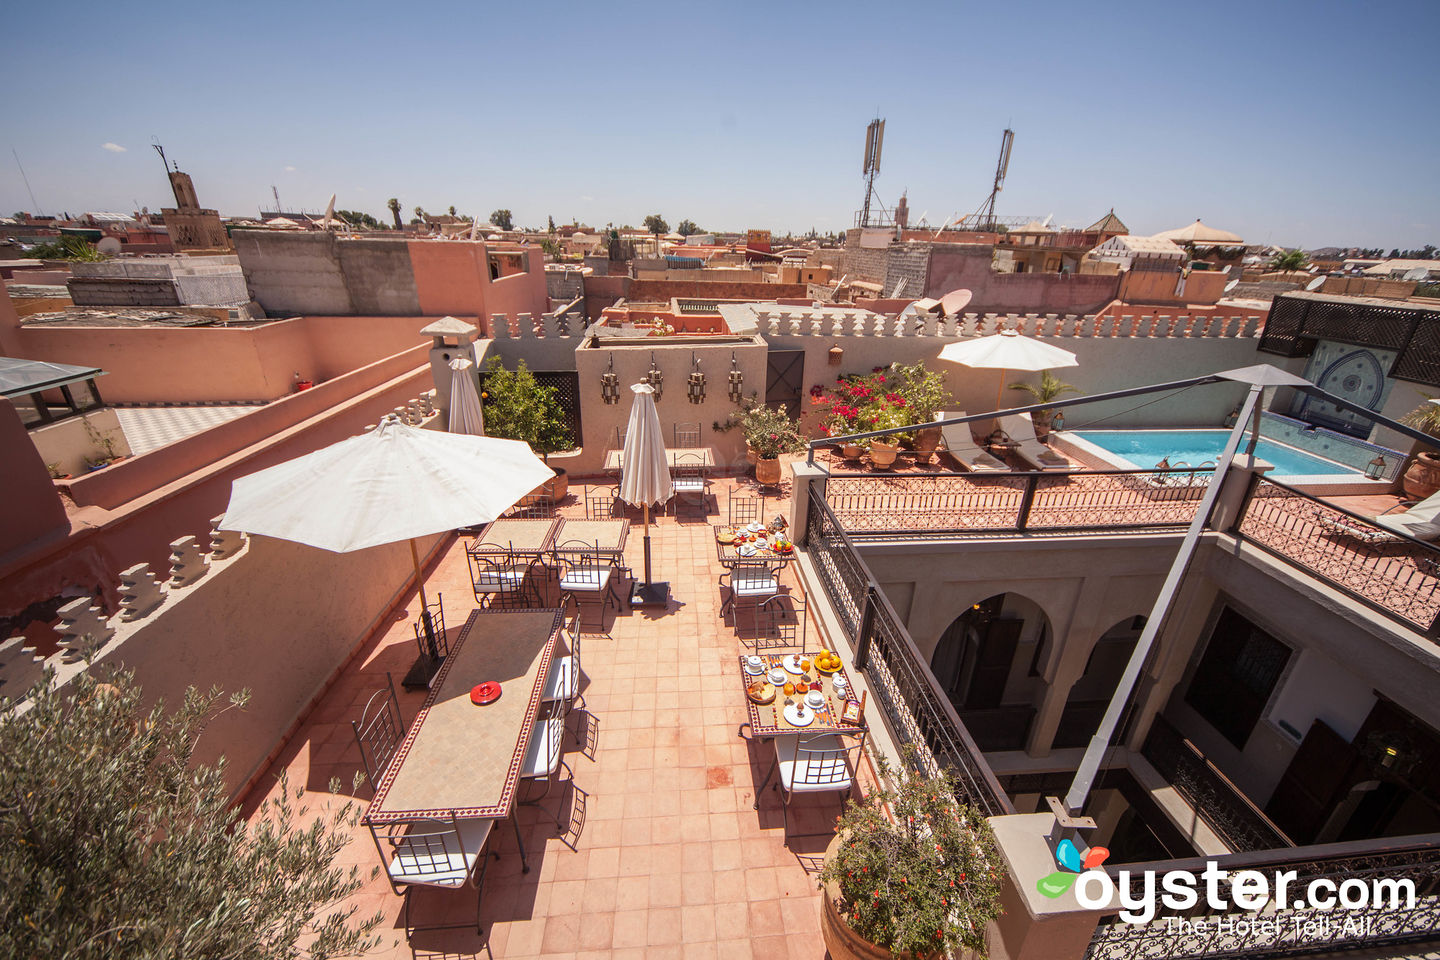 The Best Value Hotels In Marrakech Updated 2019 Oystercom